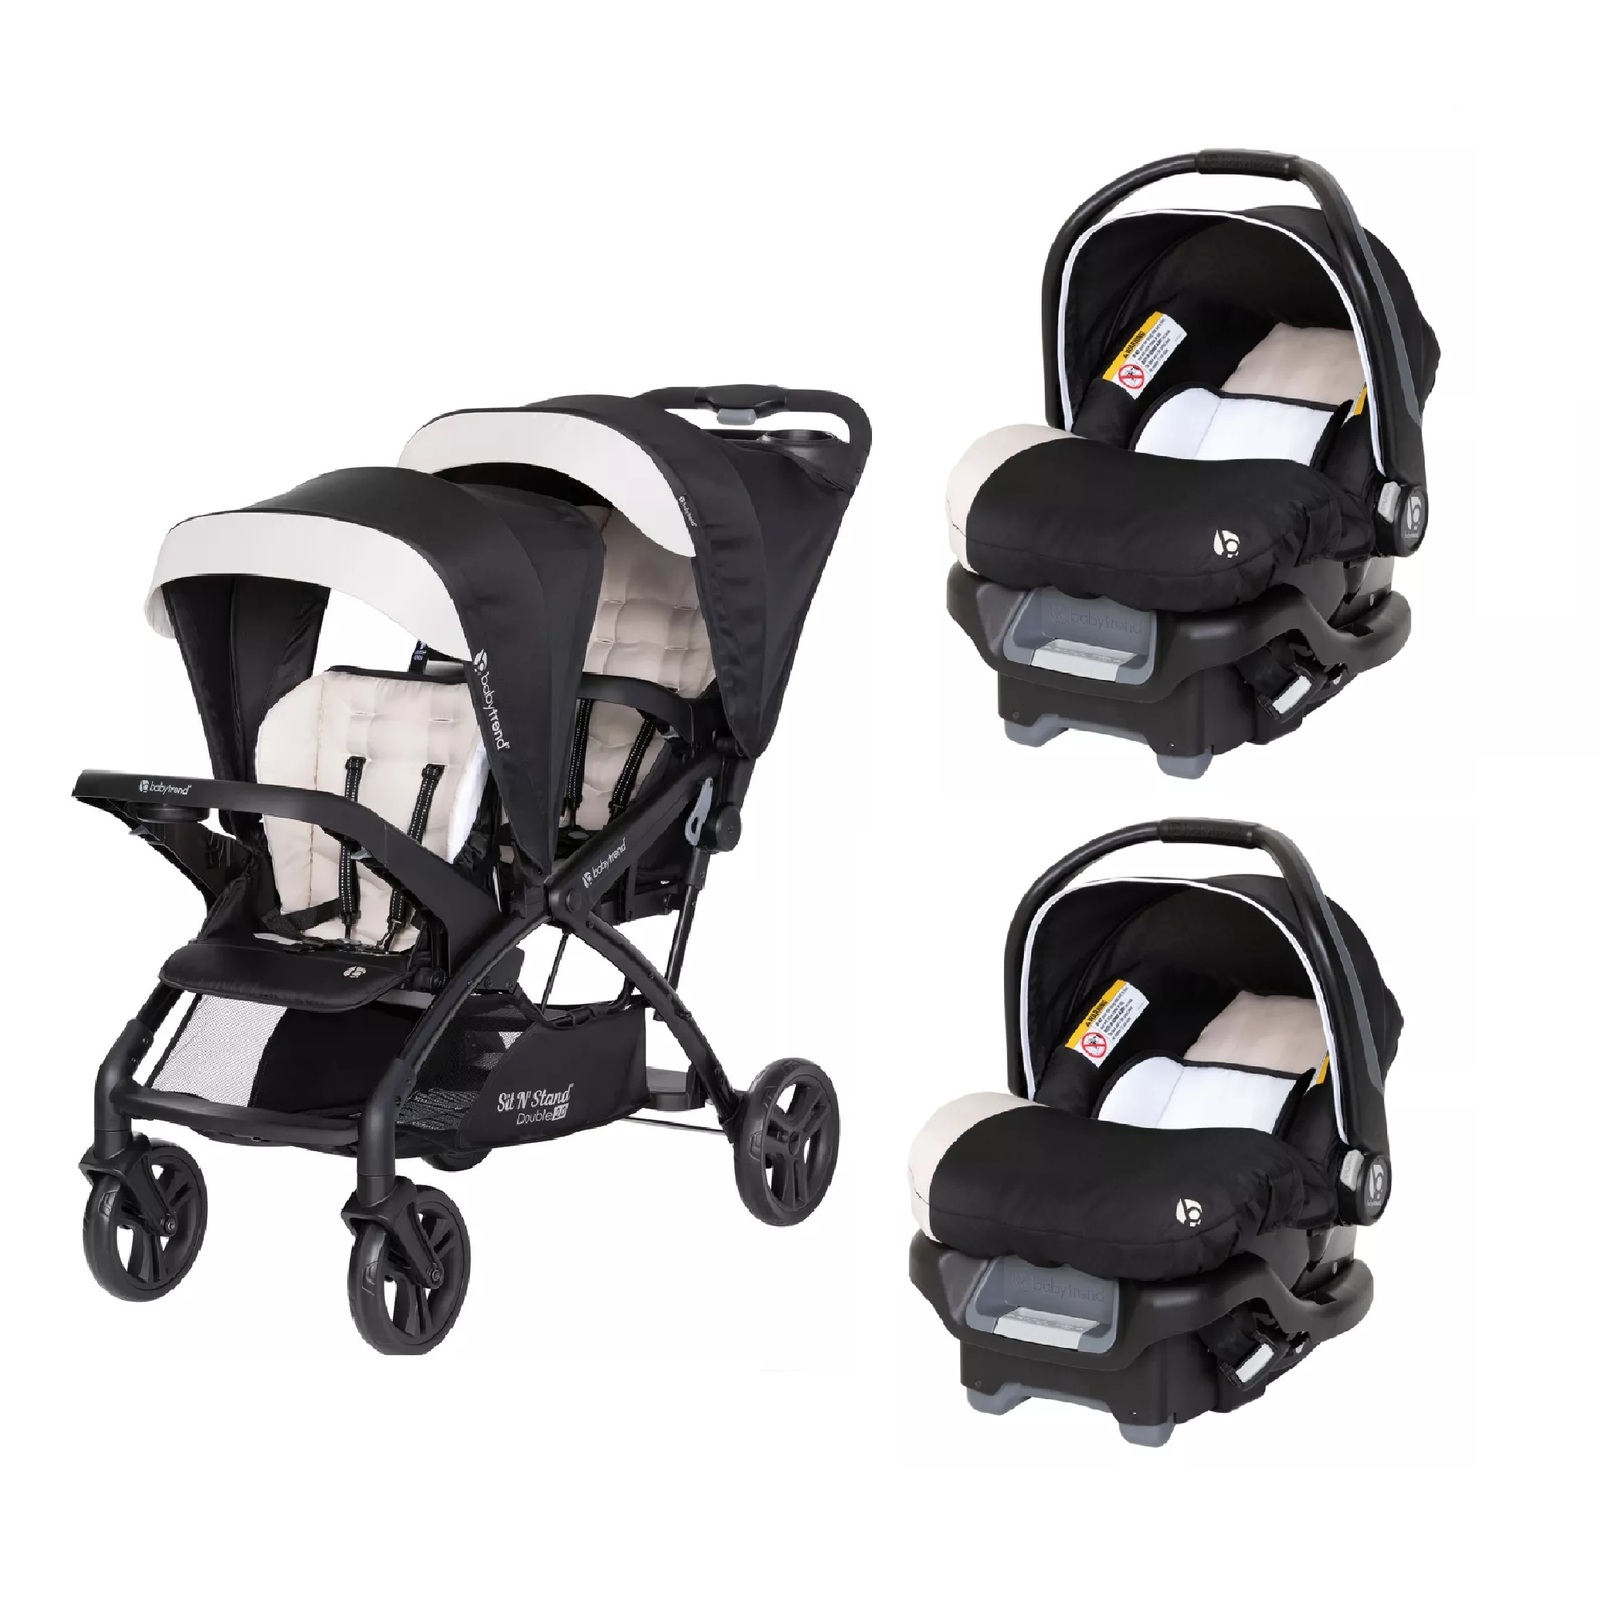 Baby Trend Twin Double Sit N Stand Stroller Travel System with 2 Infant Car Seat - $732.00